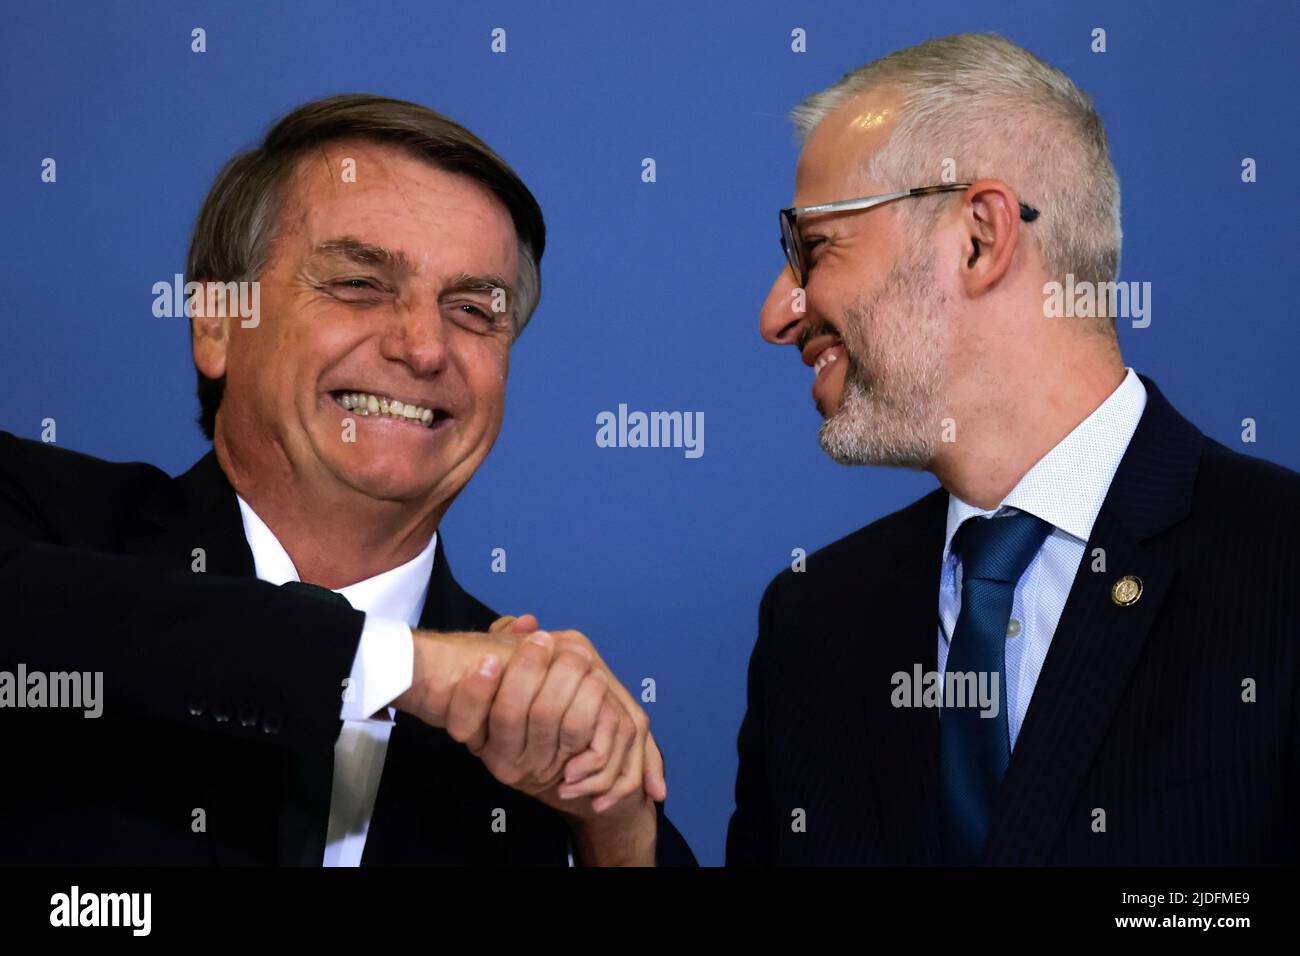 Brazil's President Jair Bolsonaro shakes hands with Brazil's Education Minister Victor Godoy during a ceremony about the National Policy for Education at the Planalto Palace in Brasilia, Brazil June 20, 2022. REUTERS/Ueslei Marcelino Stock Photo